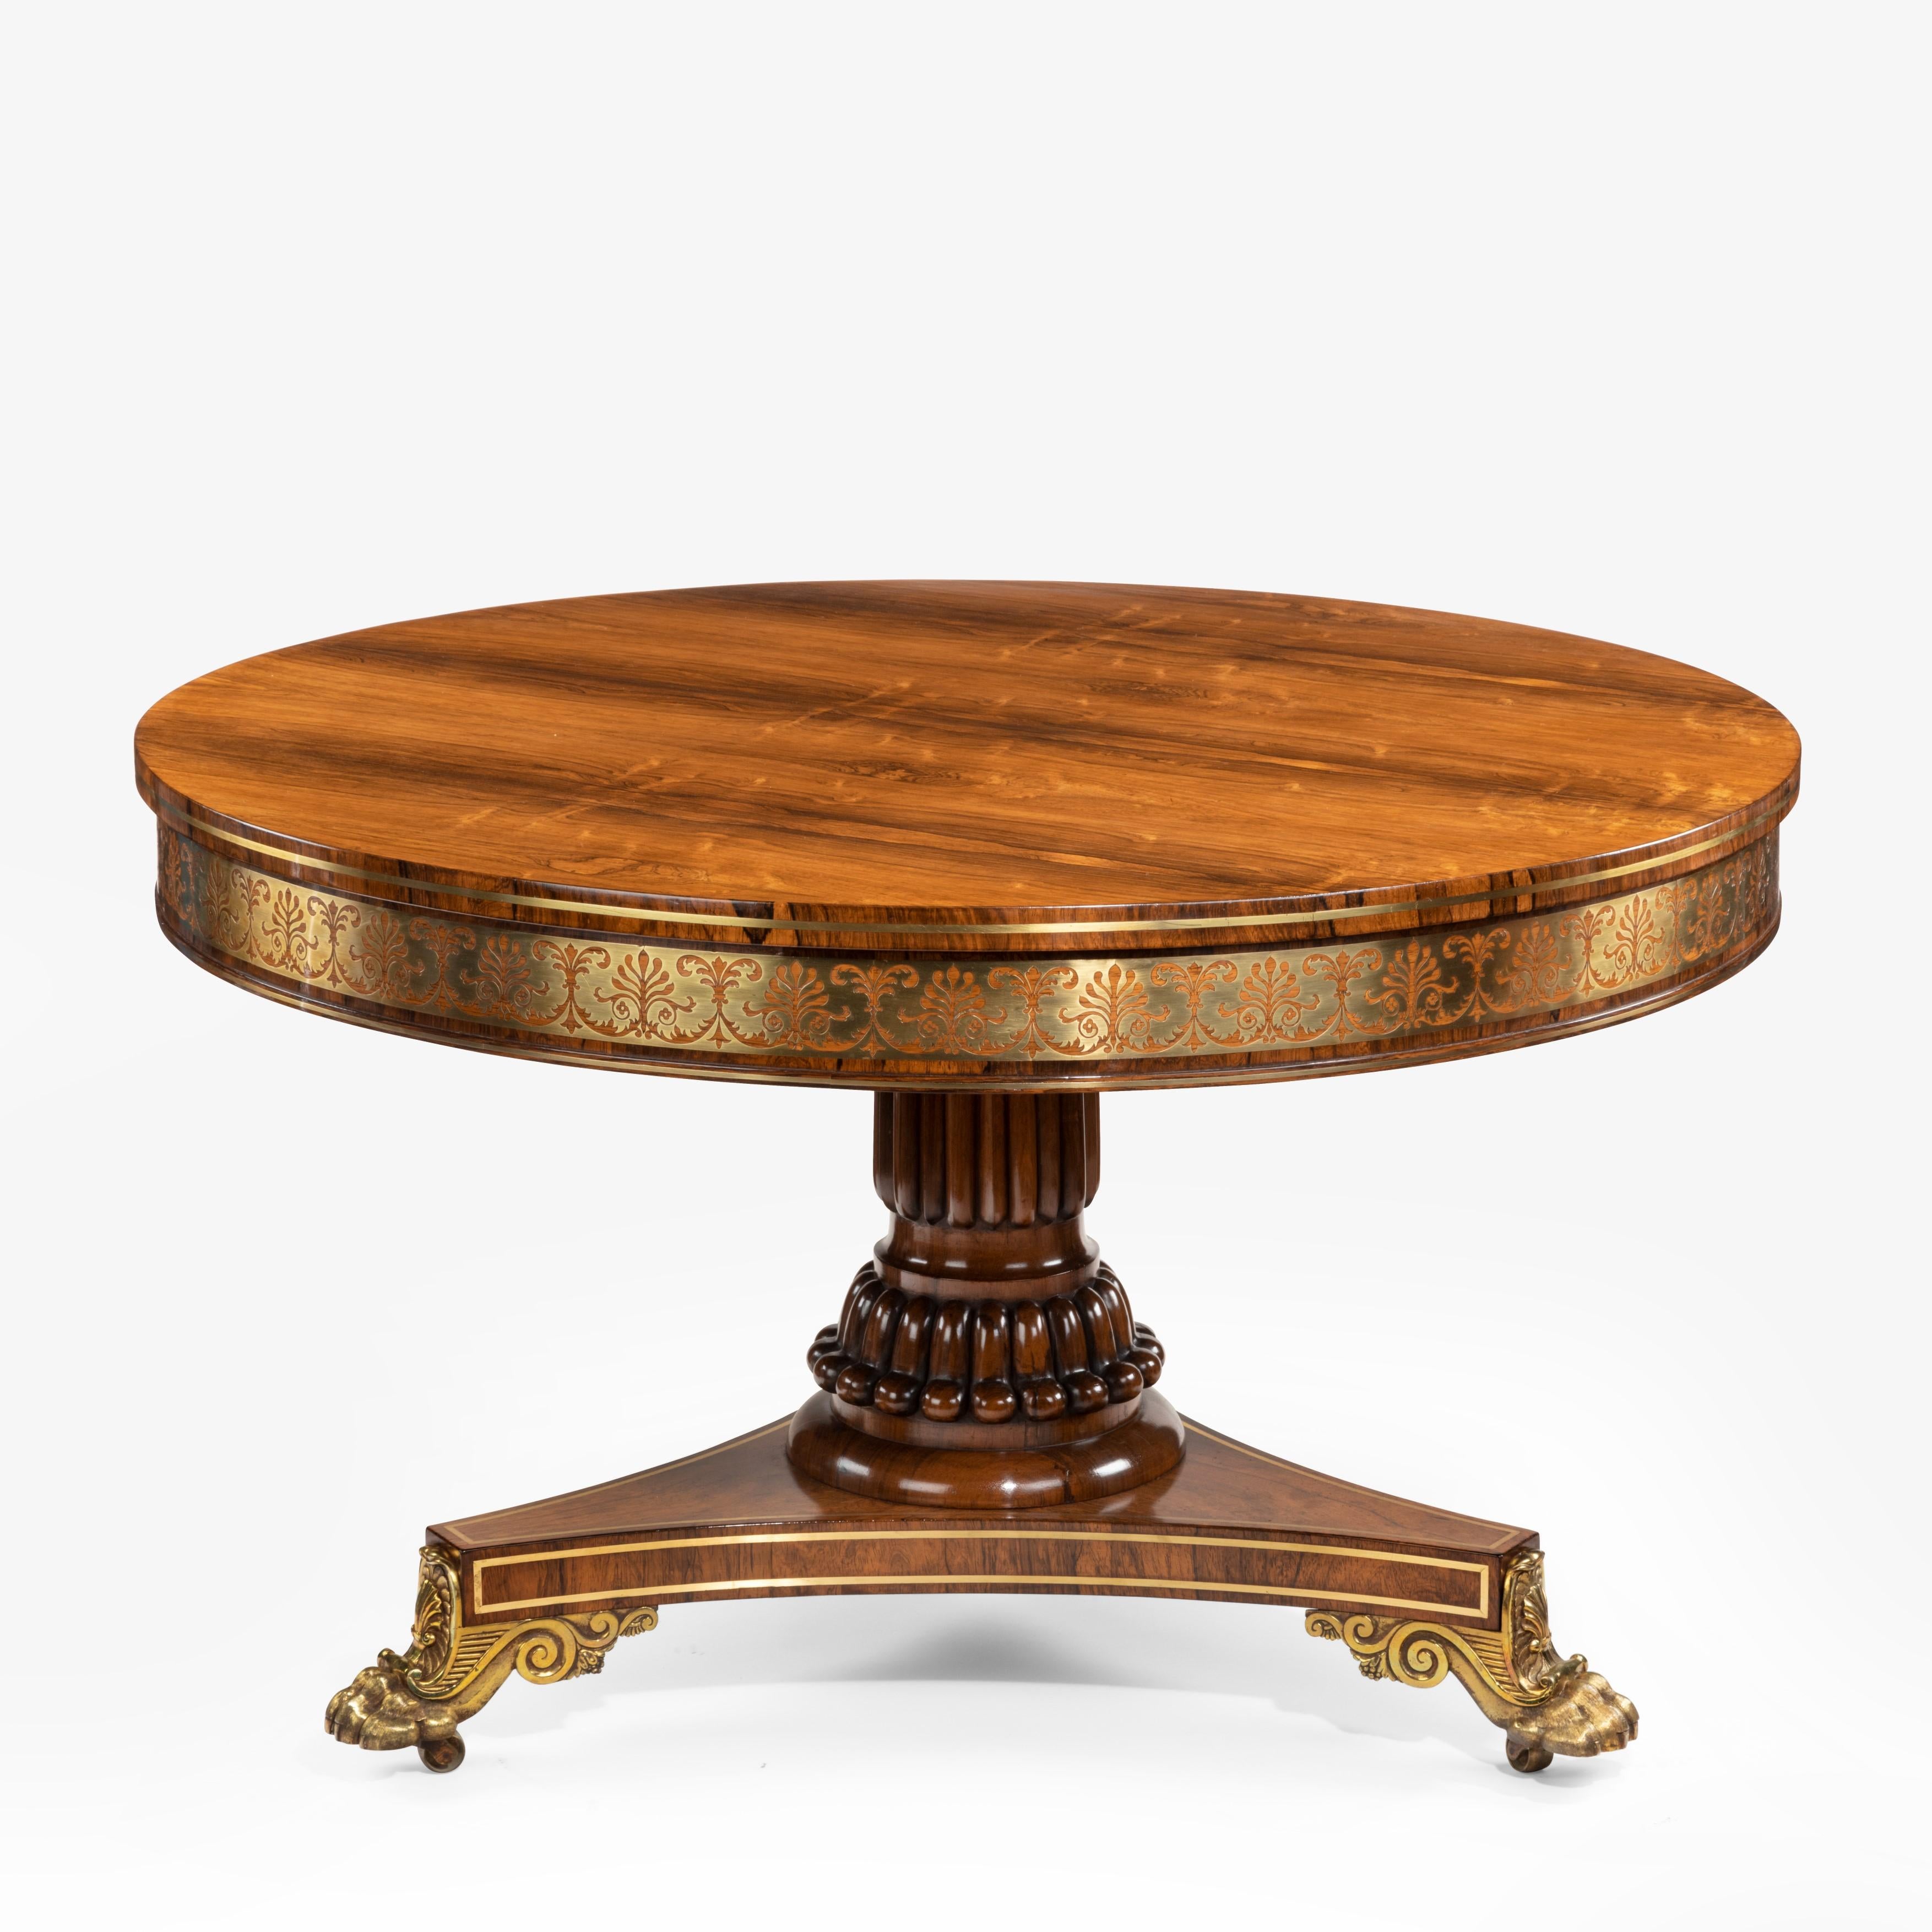 A fine George IV brass-inlaid rosewood centre table attributed to Gillows, the circular tilt-top with beautifully matched veneers, decorated with a continuous brass frieze of contre-partie anthemion and scroll-leaf and brass stringing, all set on a